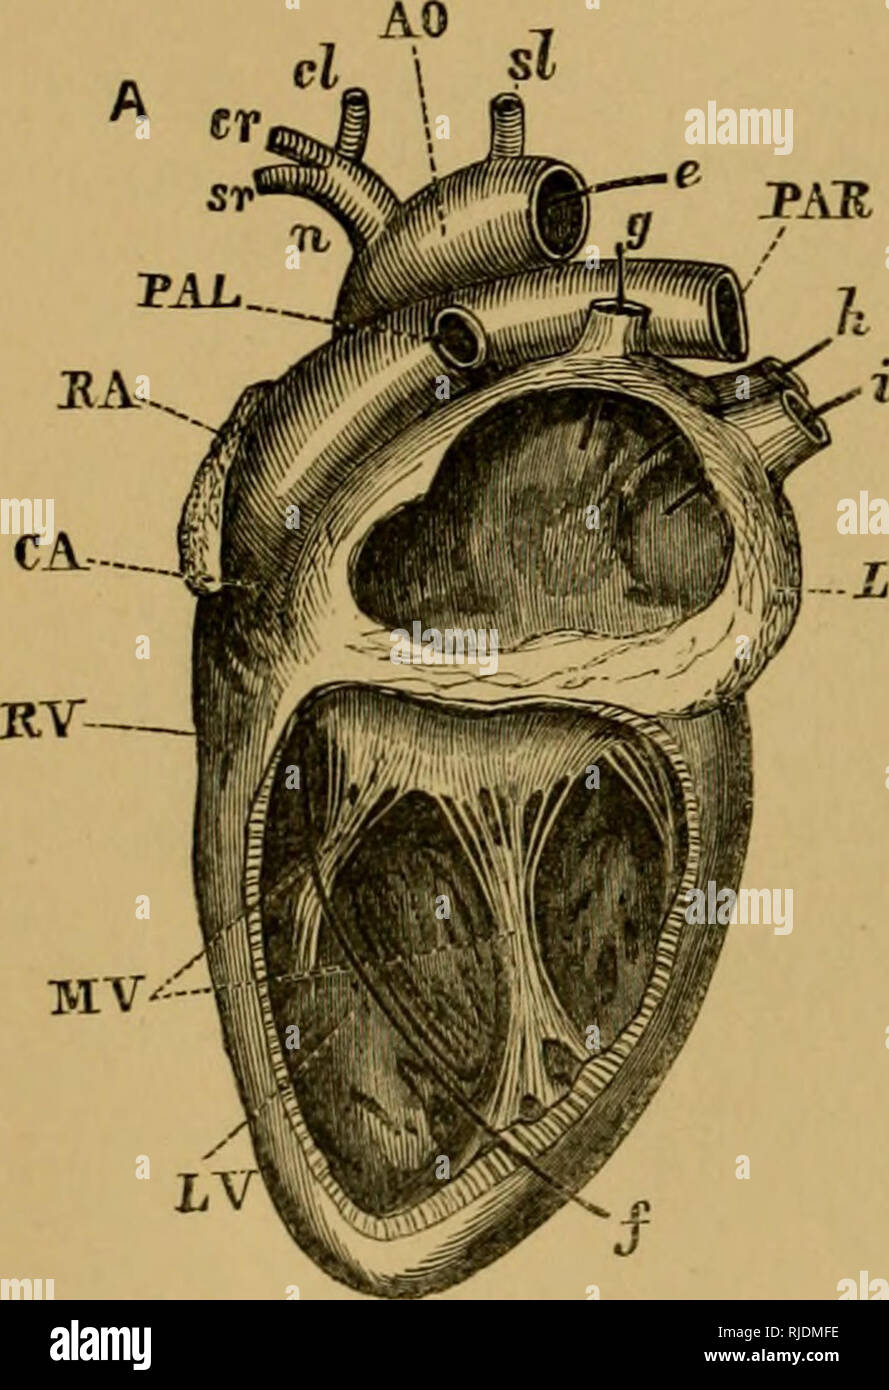 . The cat; an introduction to the study of backboned animals, especially mammals. Cats; Anatomy, Comparative. 200 TEE CAT. [chap. VII. are called anricles, and the other two, ventricles—onQ of each on each side. The auricle and ventricle of the right side are com- pletely divided off from those of the left side. The auricles open into the ventricles hy valvular apertui'es, and valves guard the openings of the great vessels. Such heing a summary of its main characters, its various parts need examination in detail. The heart of the cat lies on the ventral side of the body, within. LV. Please not Stock Photo